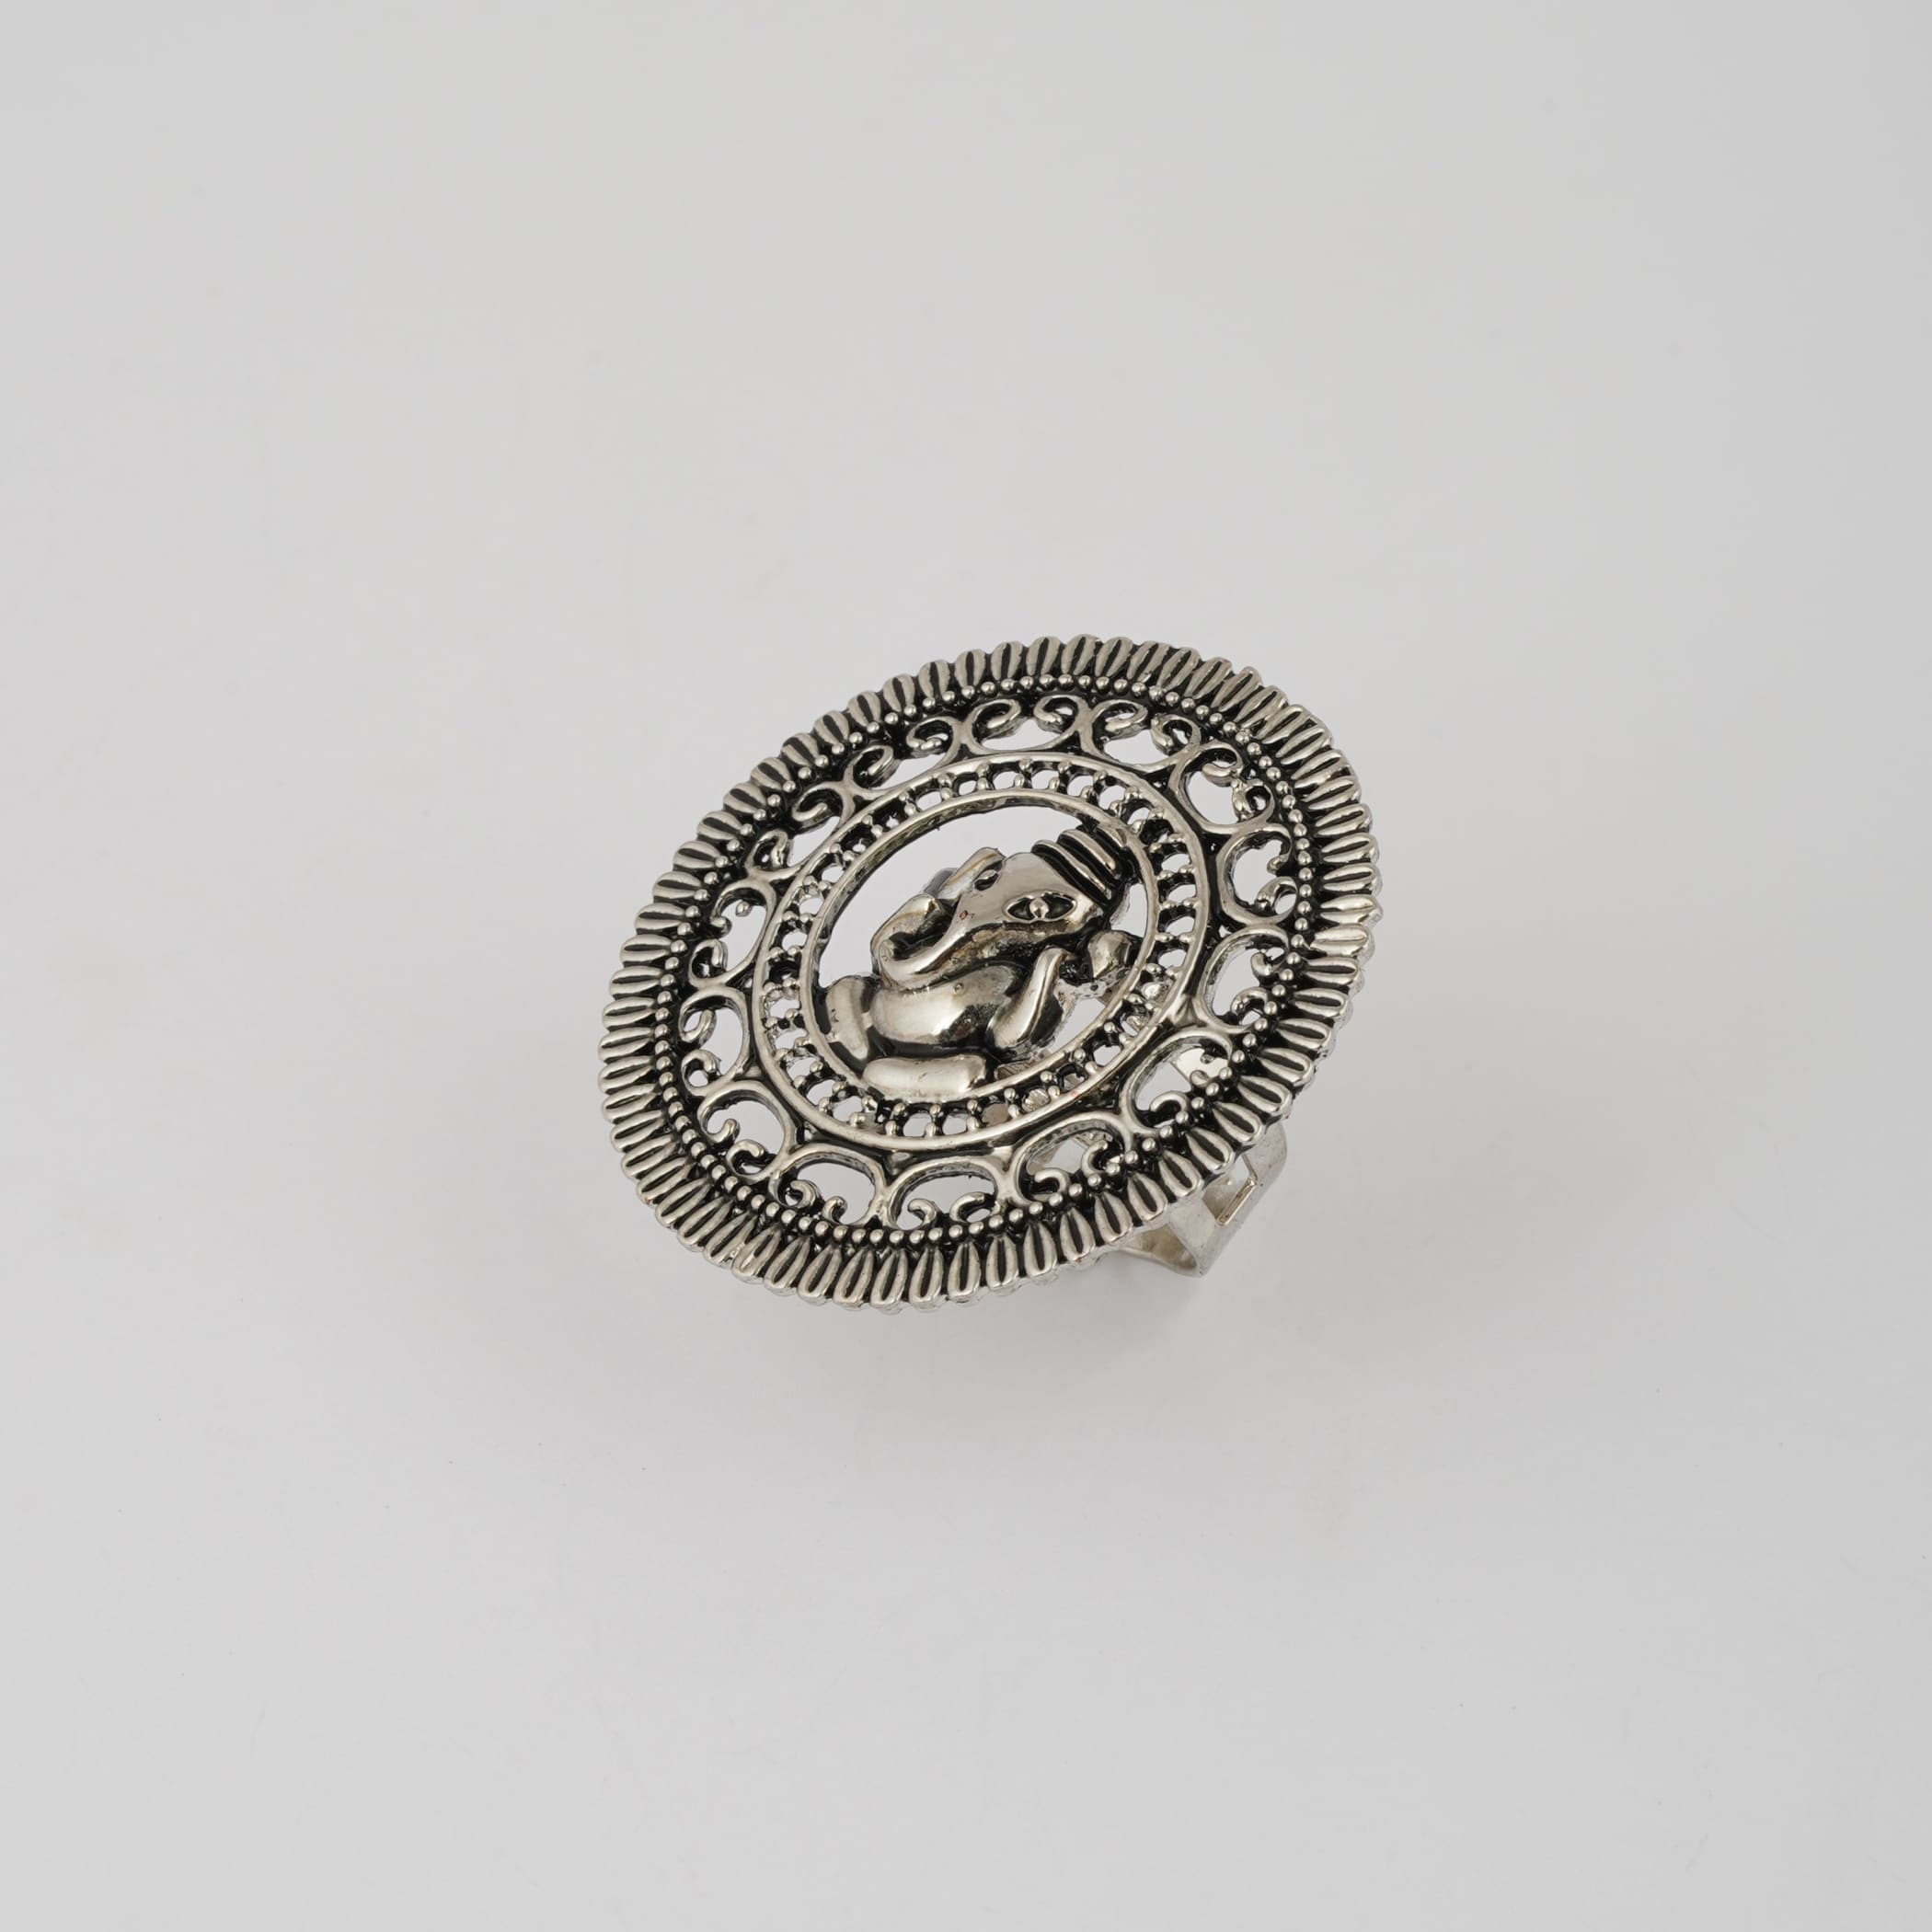 Ganesha classic ring with oxidized plating women rings